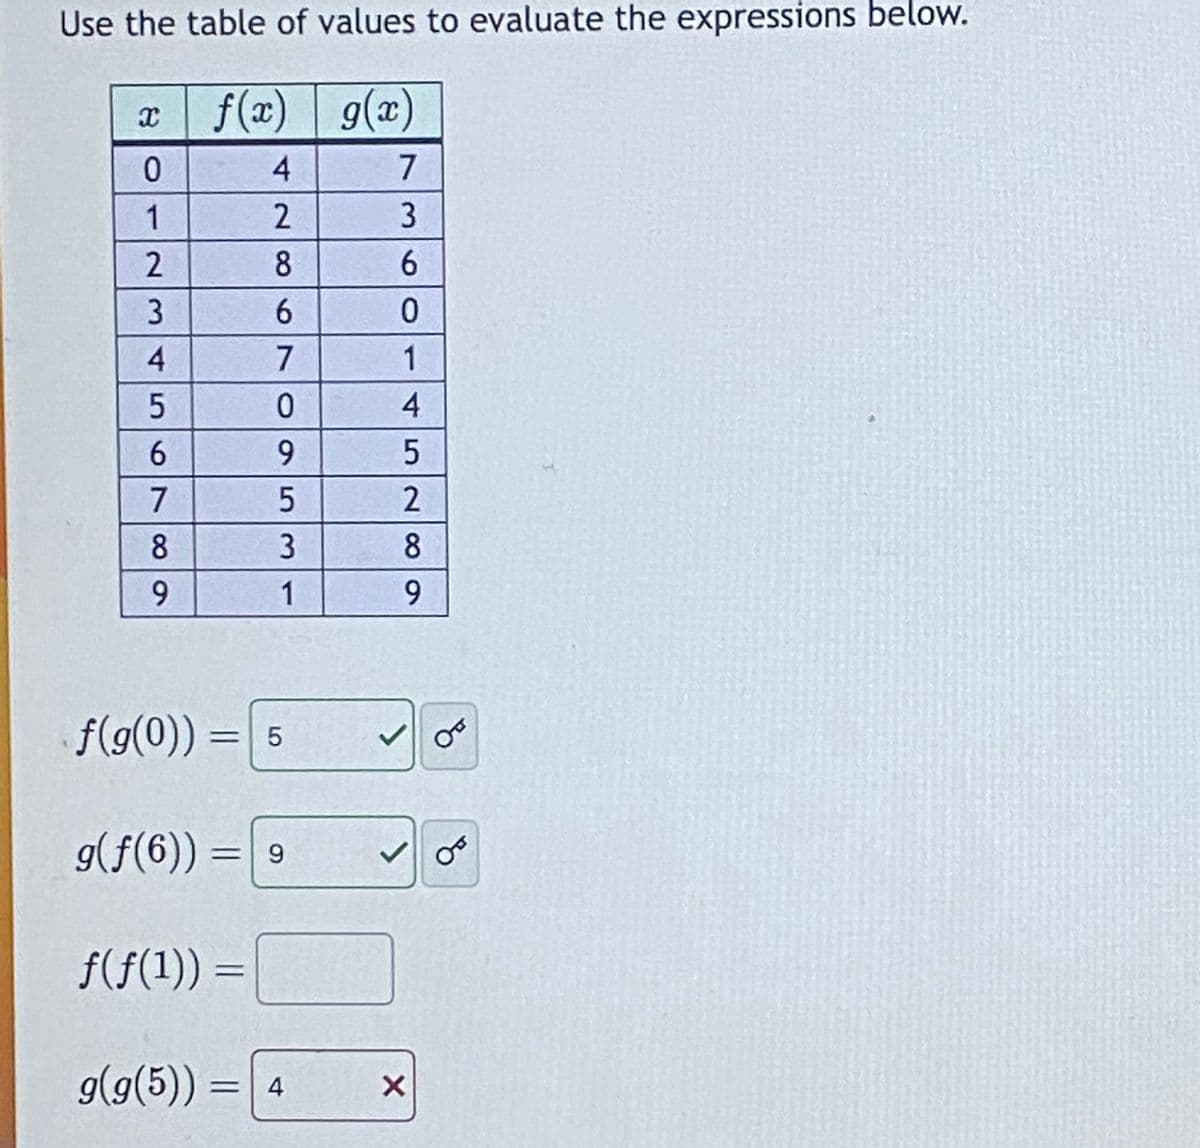 Use the table of values to evaluate the expressions below.
f(x) g(x)
4
7
2
3
8
6
6
0
1
4
5
2
8
9
0
1
2345678
9
7
ƒ(ƒ(1)) =
g(g(5)) = |
0
9
5
3
1
f(g(0)) = 5
g(f(6)) =
9
[
4
X
OT
OF